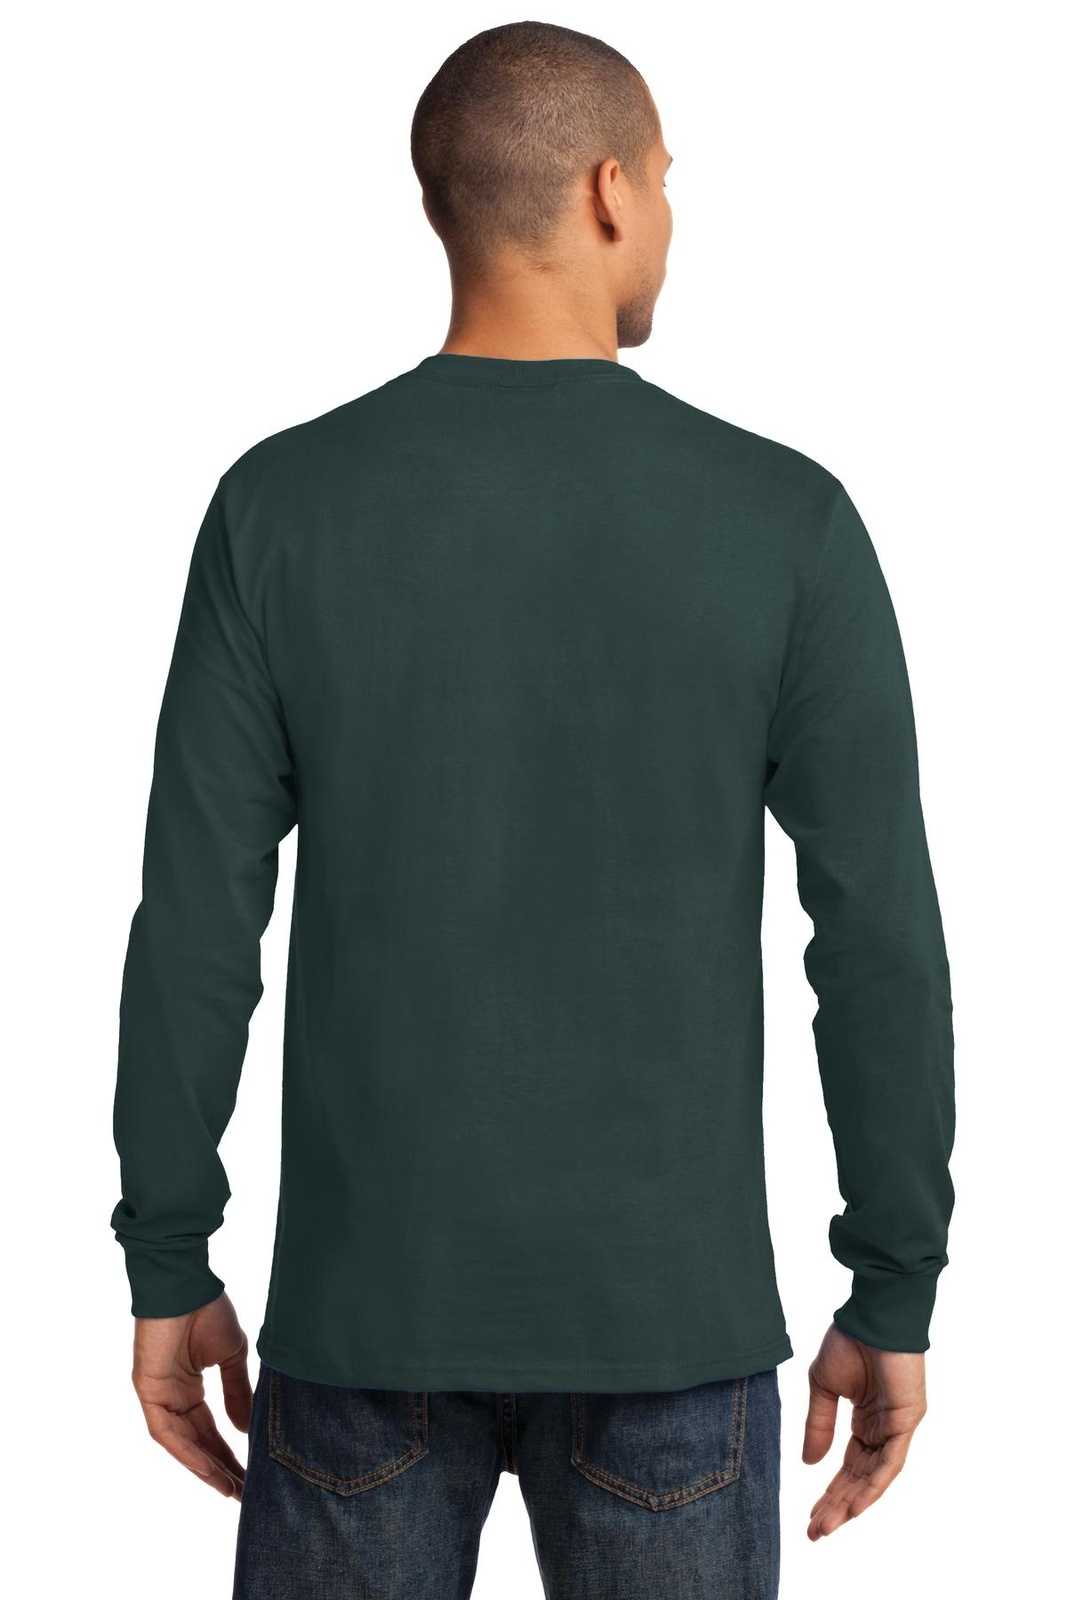 Port & Company PC61LST Tall Long Sleeve Essential Tee - Dark Green - HIT a Double - 1